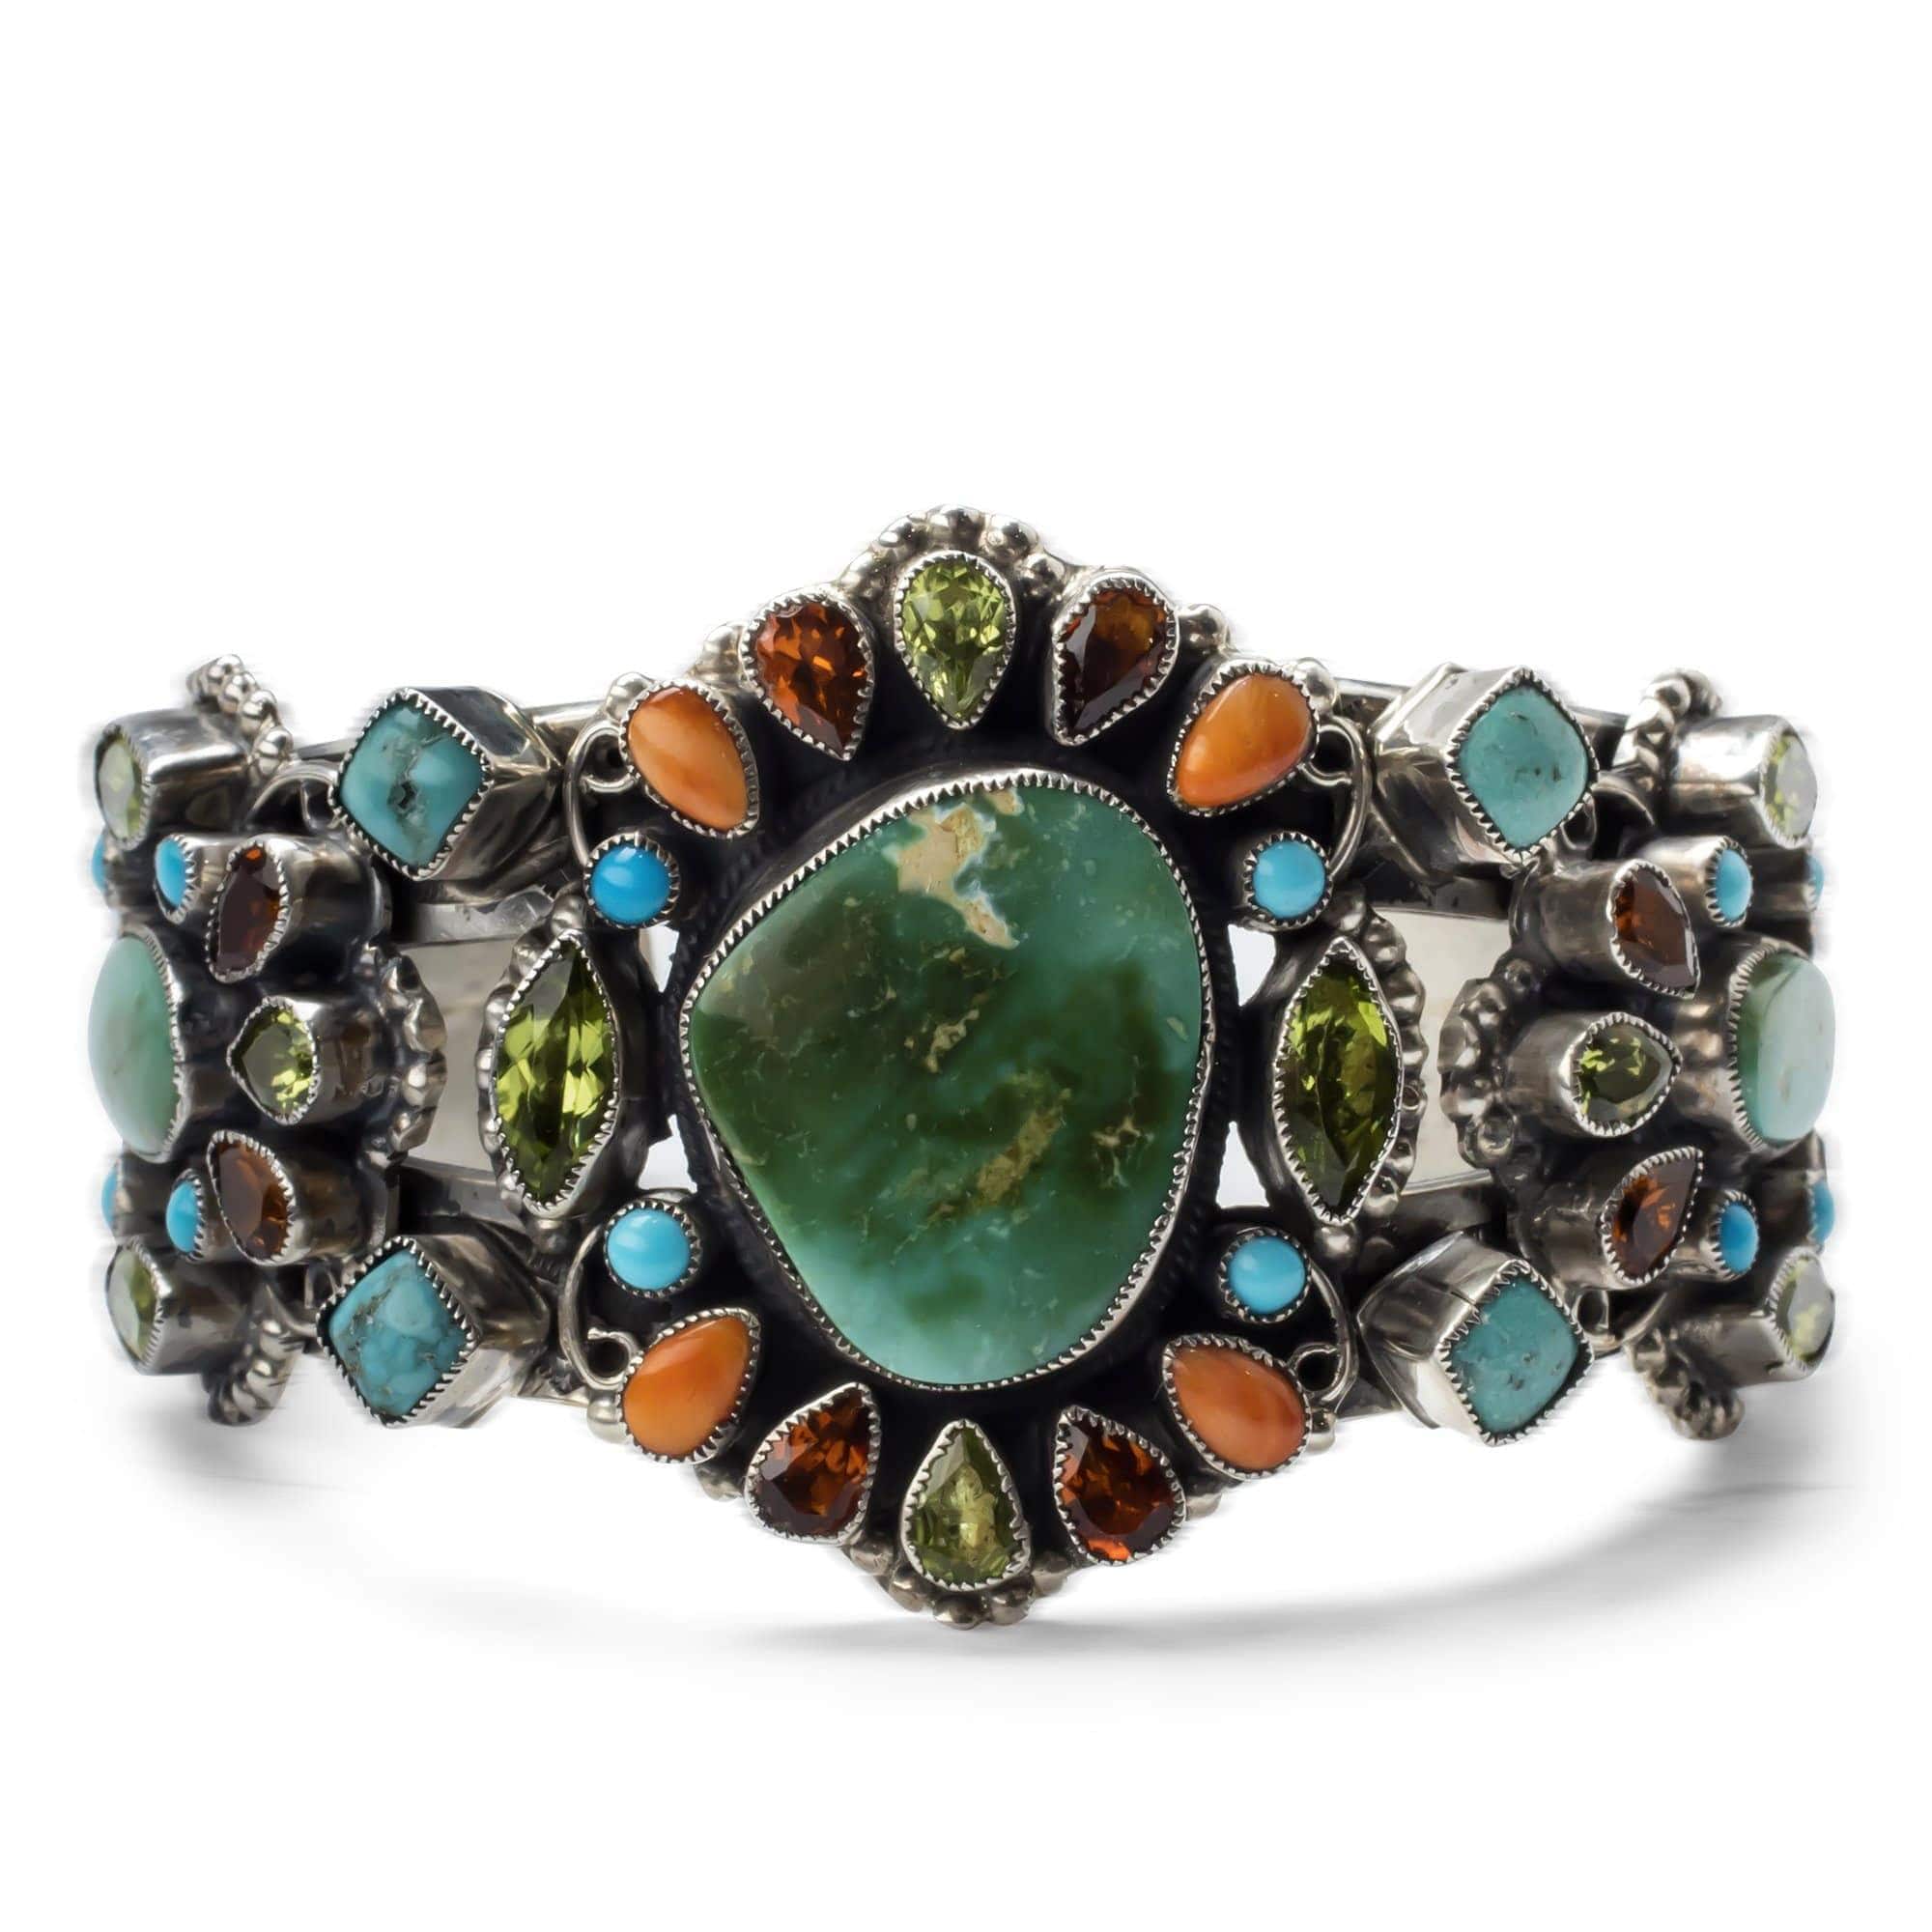 Kalifano Native American Jewelry Leo Feeney Royston & Sleeping Beauty Turquoise, Orange Spiny Oyster Shell, Peridot, and Hessonite USA Native American Made 925 Sterling Silver Cuff NAB4500.002